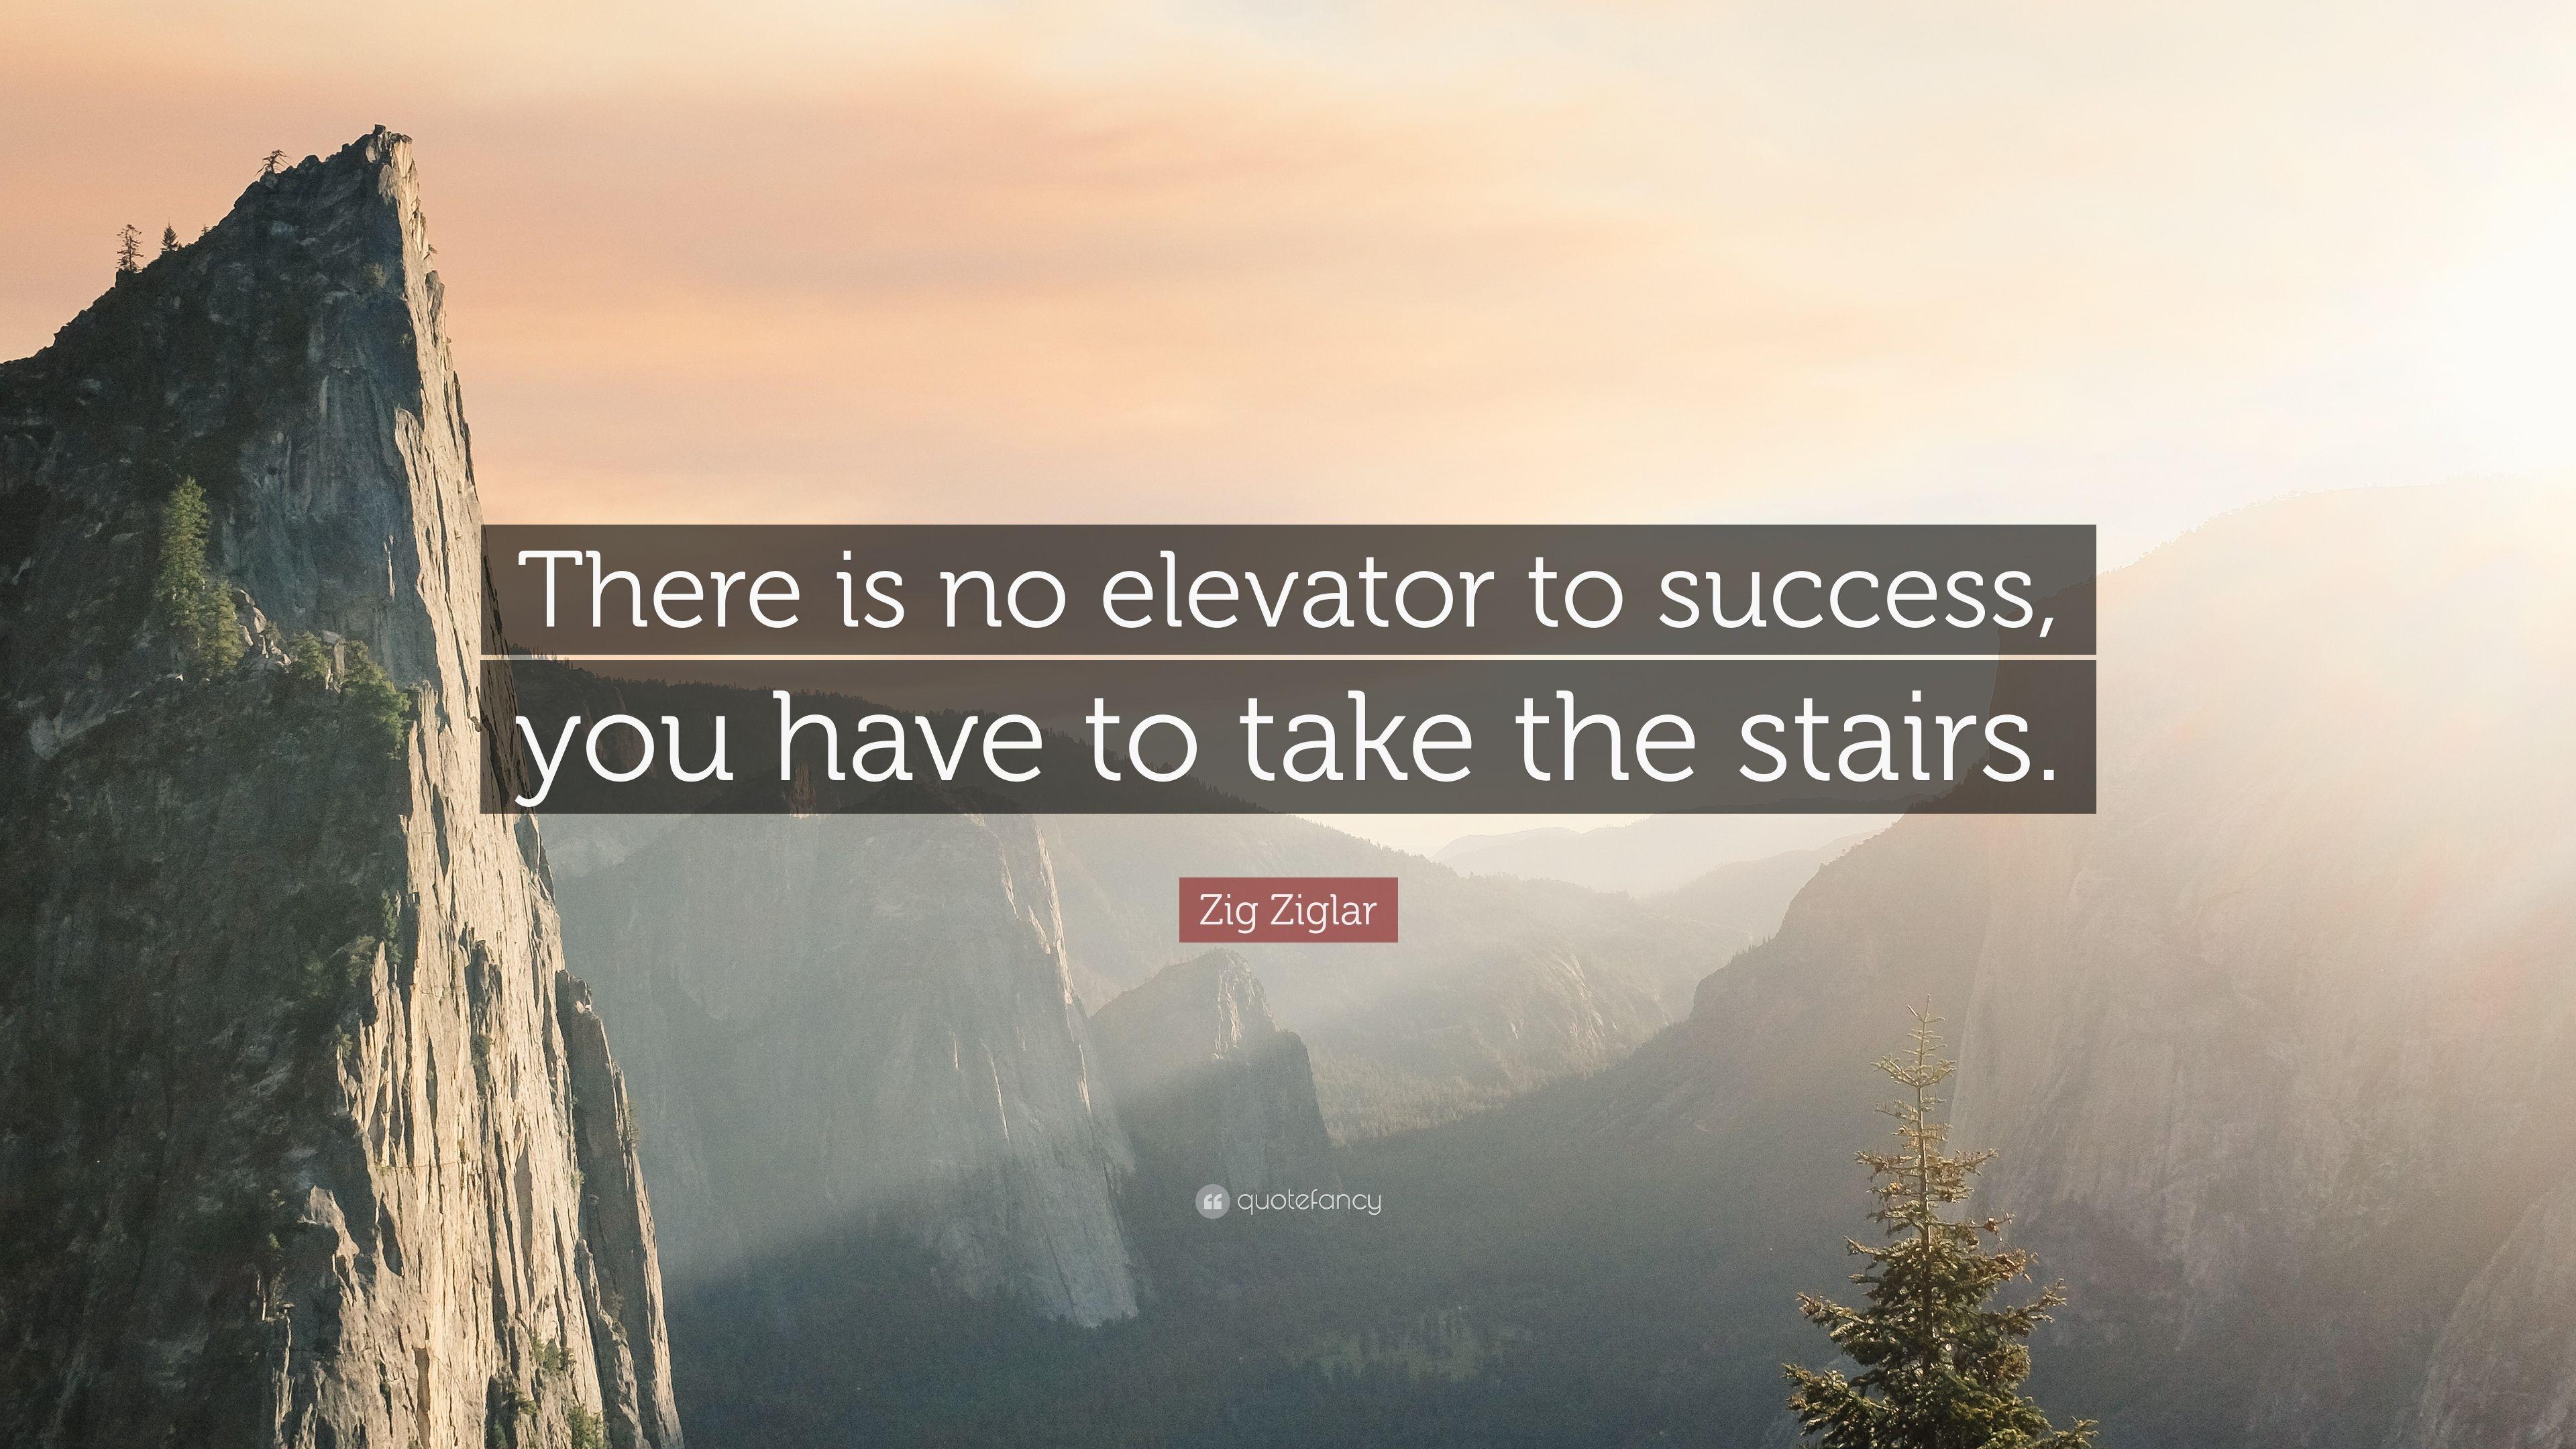 Zig Ziglar Quote: “There is no elevator to success, you have to